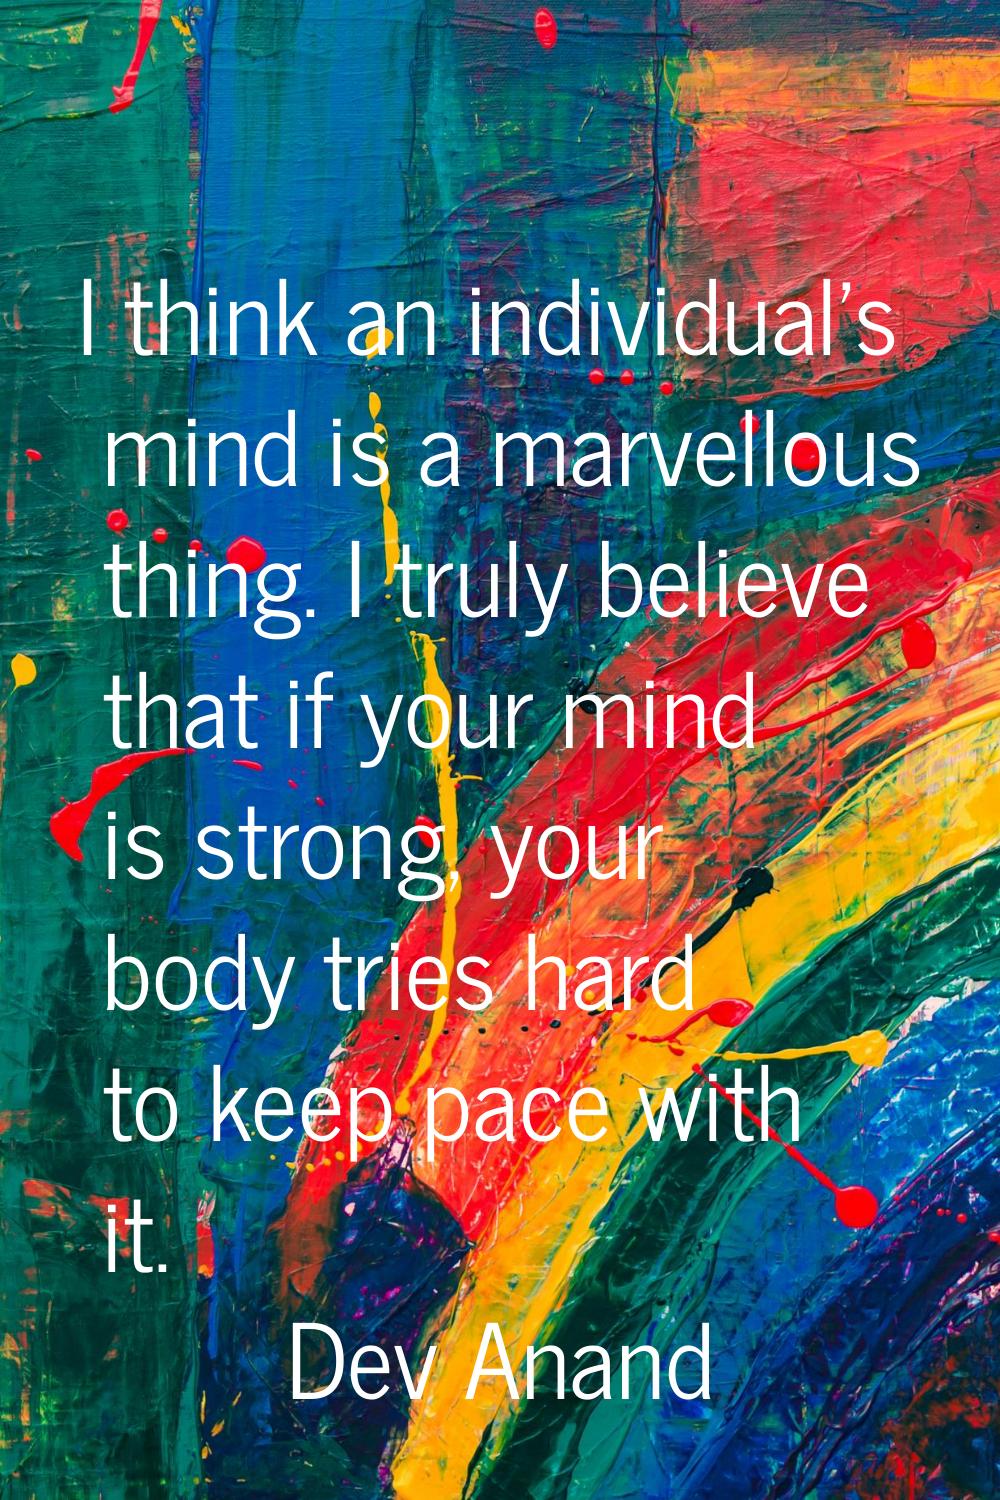 I think an individual's mind is a marvellous thing. I truly believe that if your mind is strong, yo